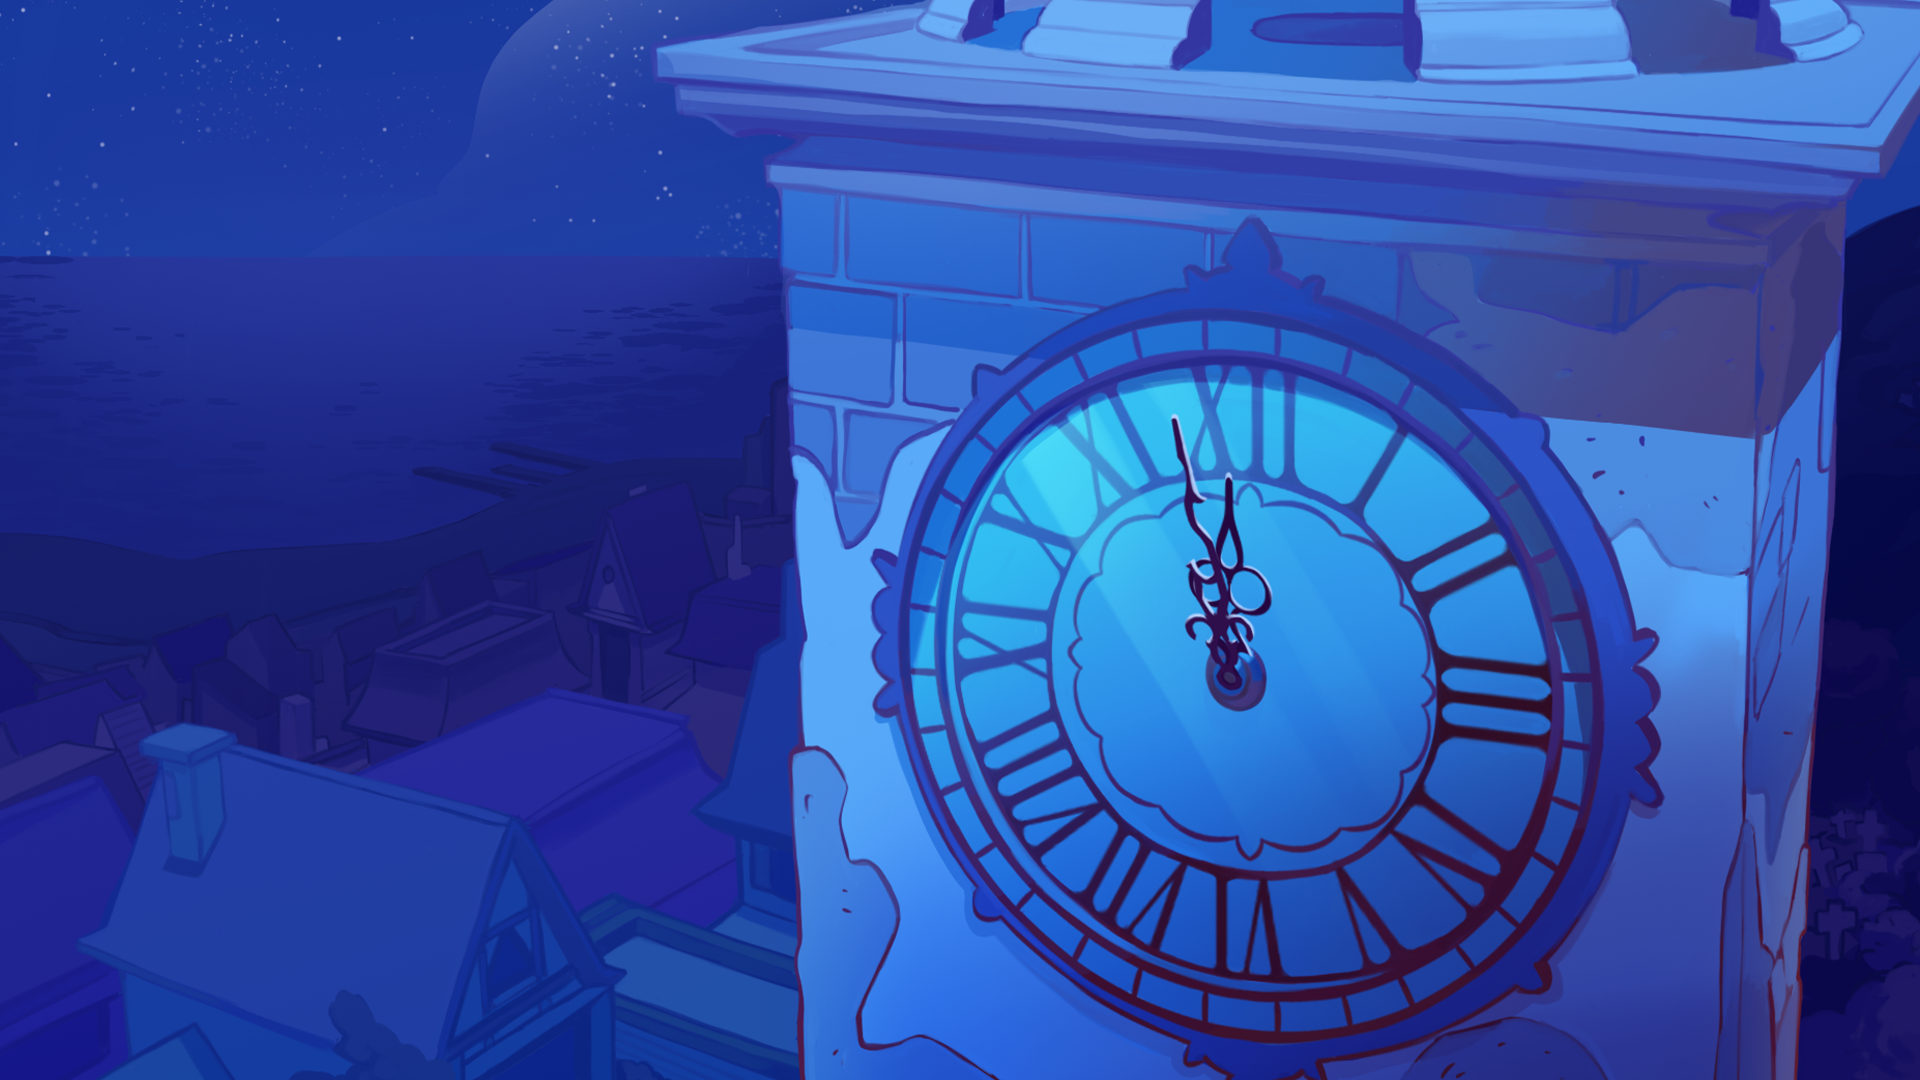 Background of the clock at night, 3 minutes before midnight. In the background, roofs and the sea are visible.